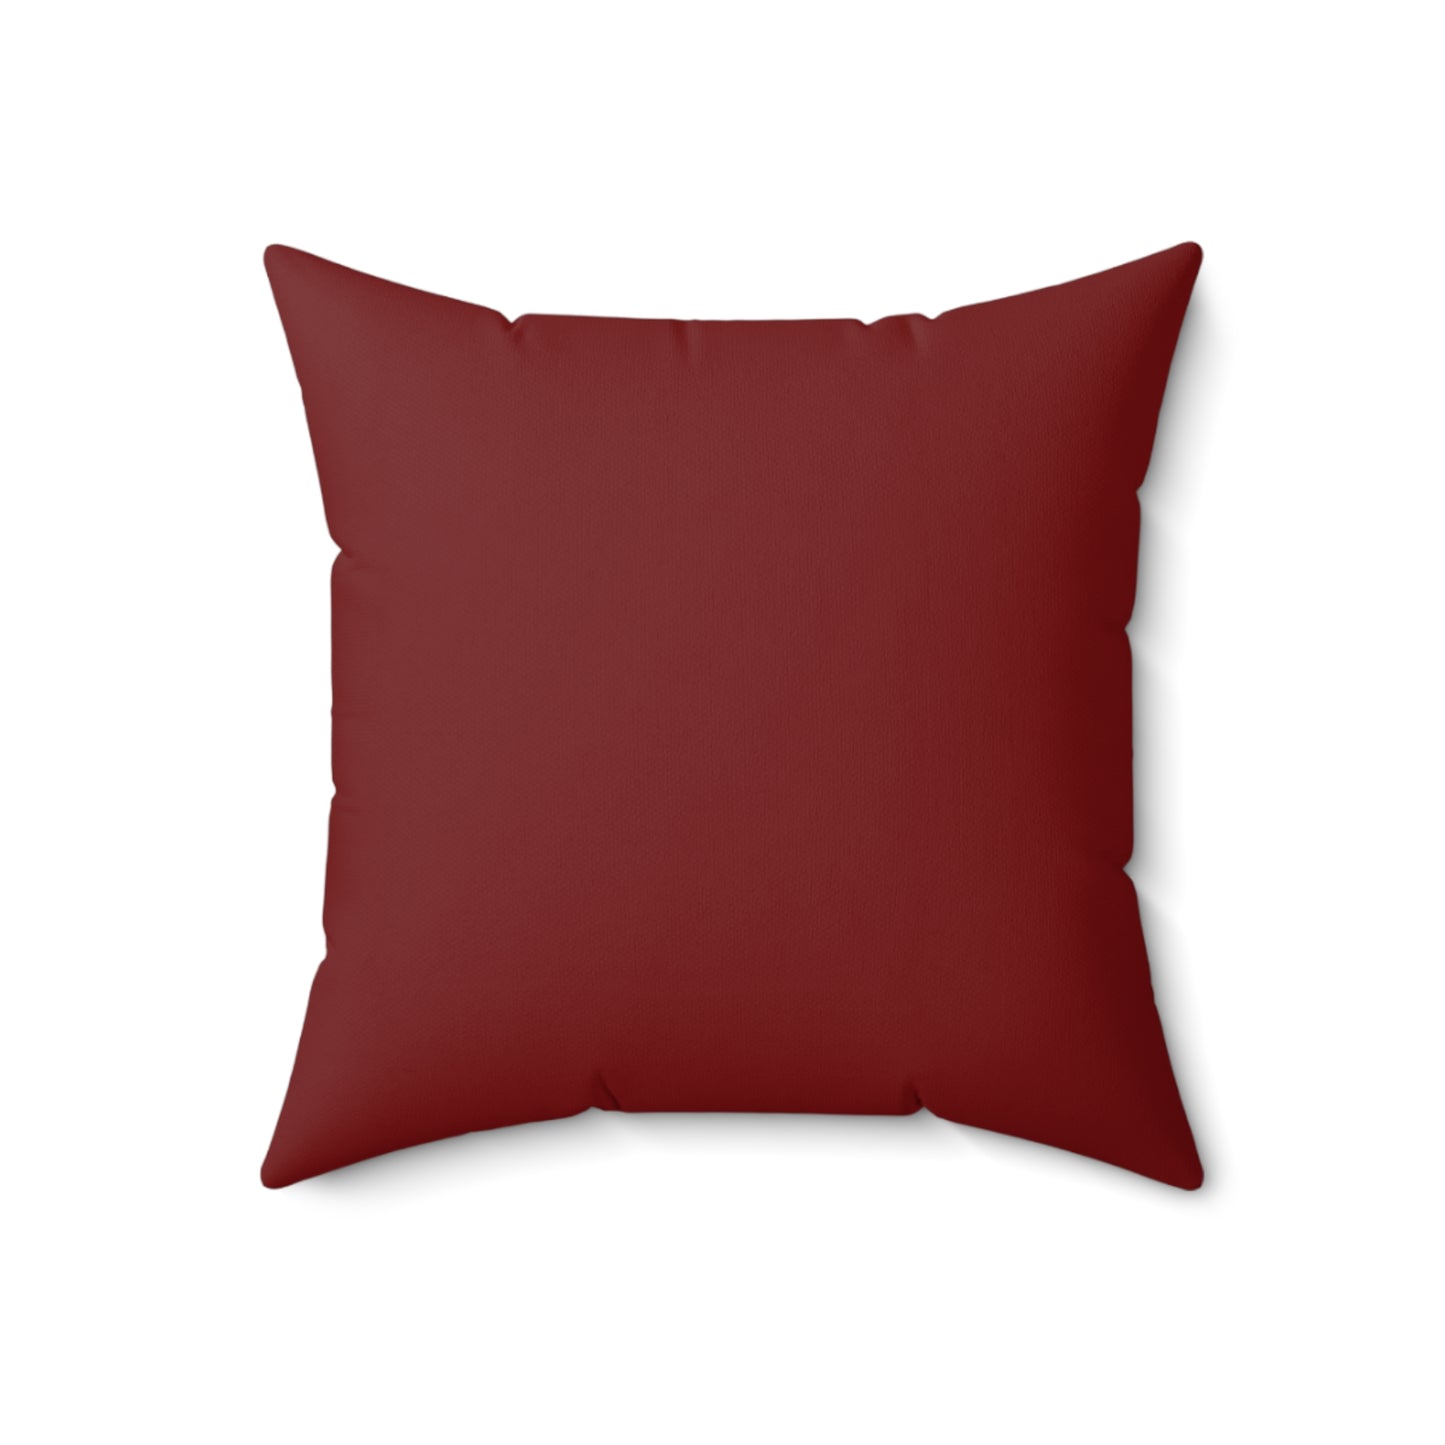 Faux Suede Throw Pillow - Barn Red 28